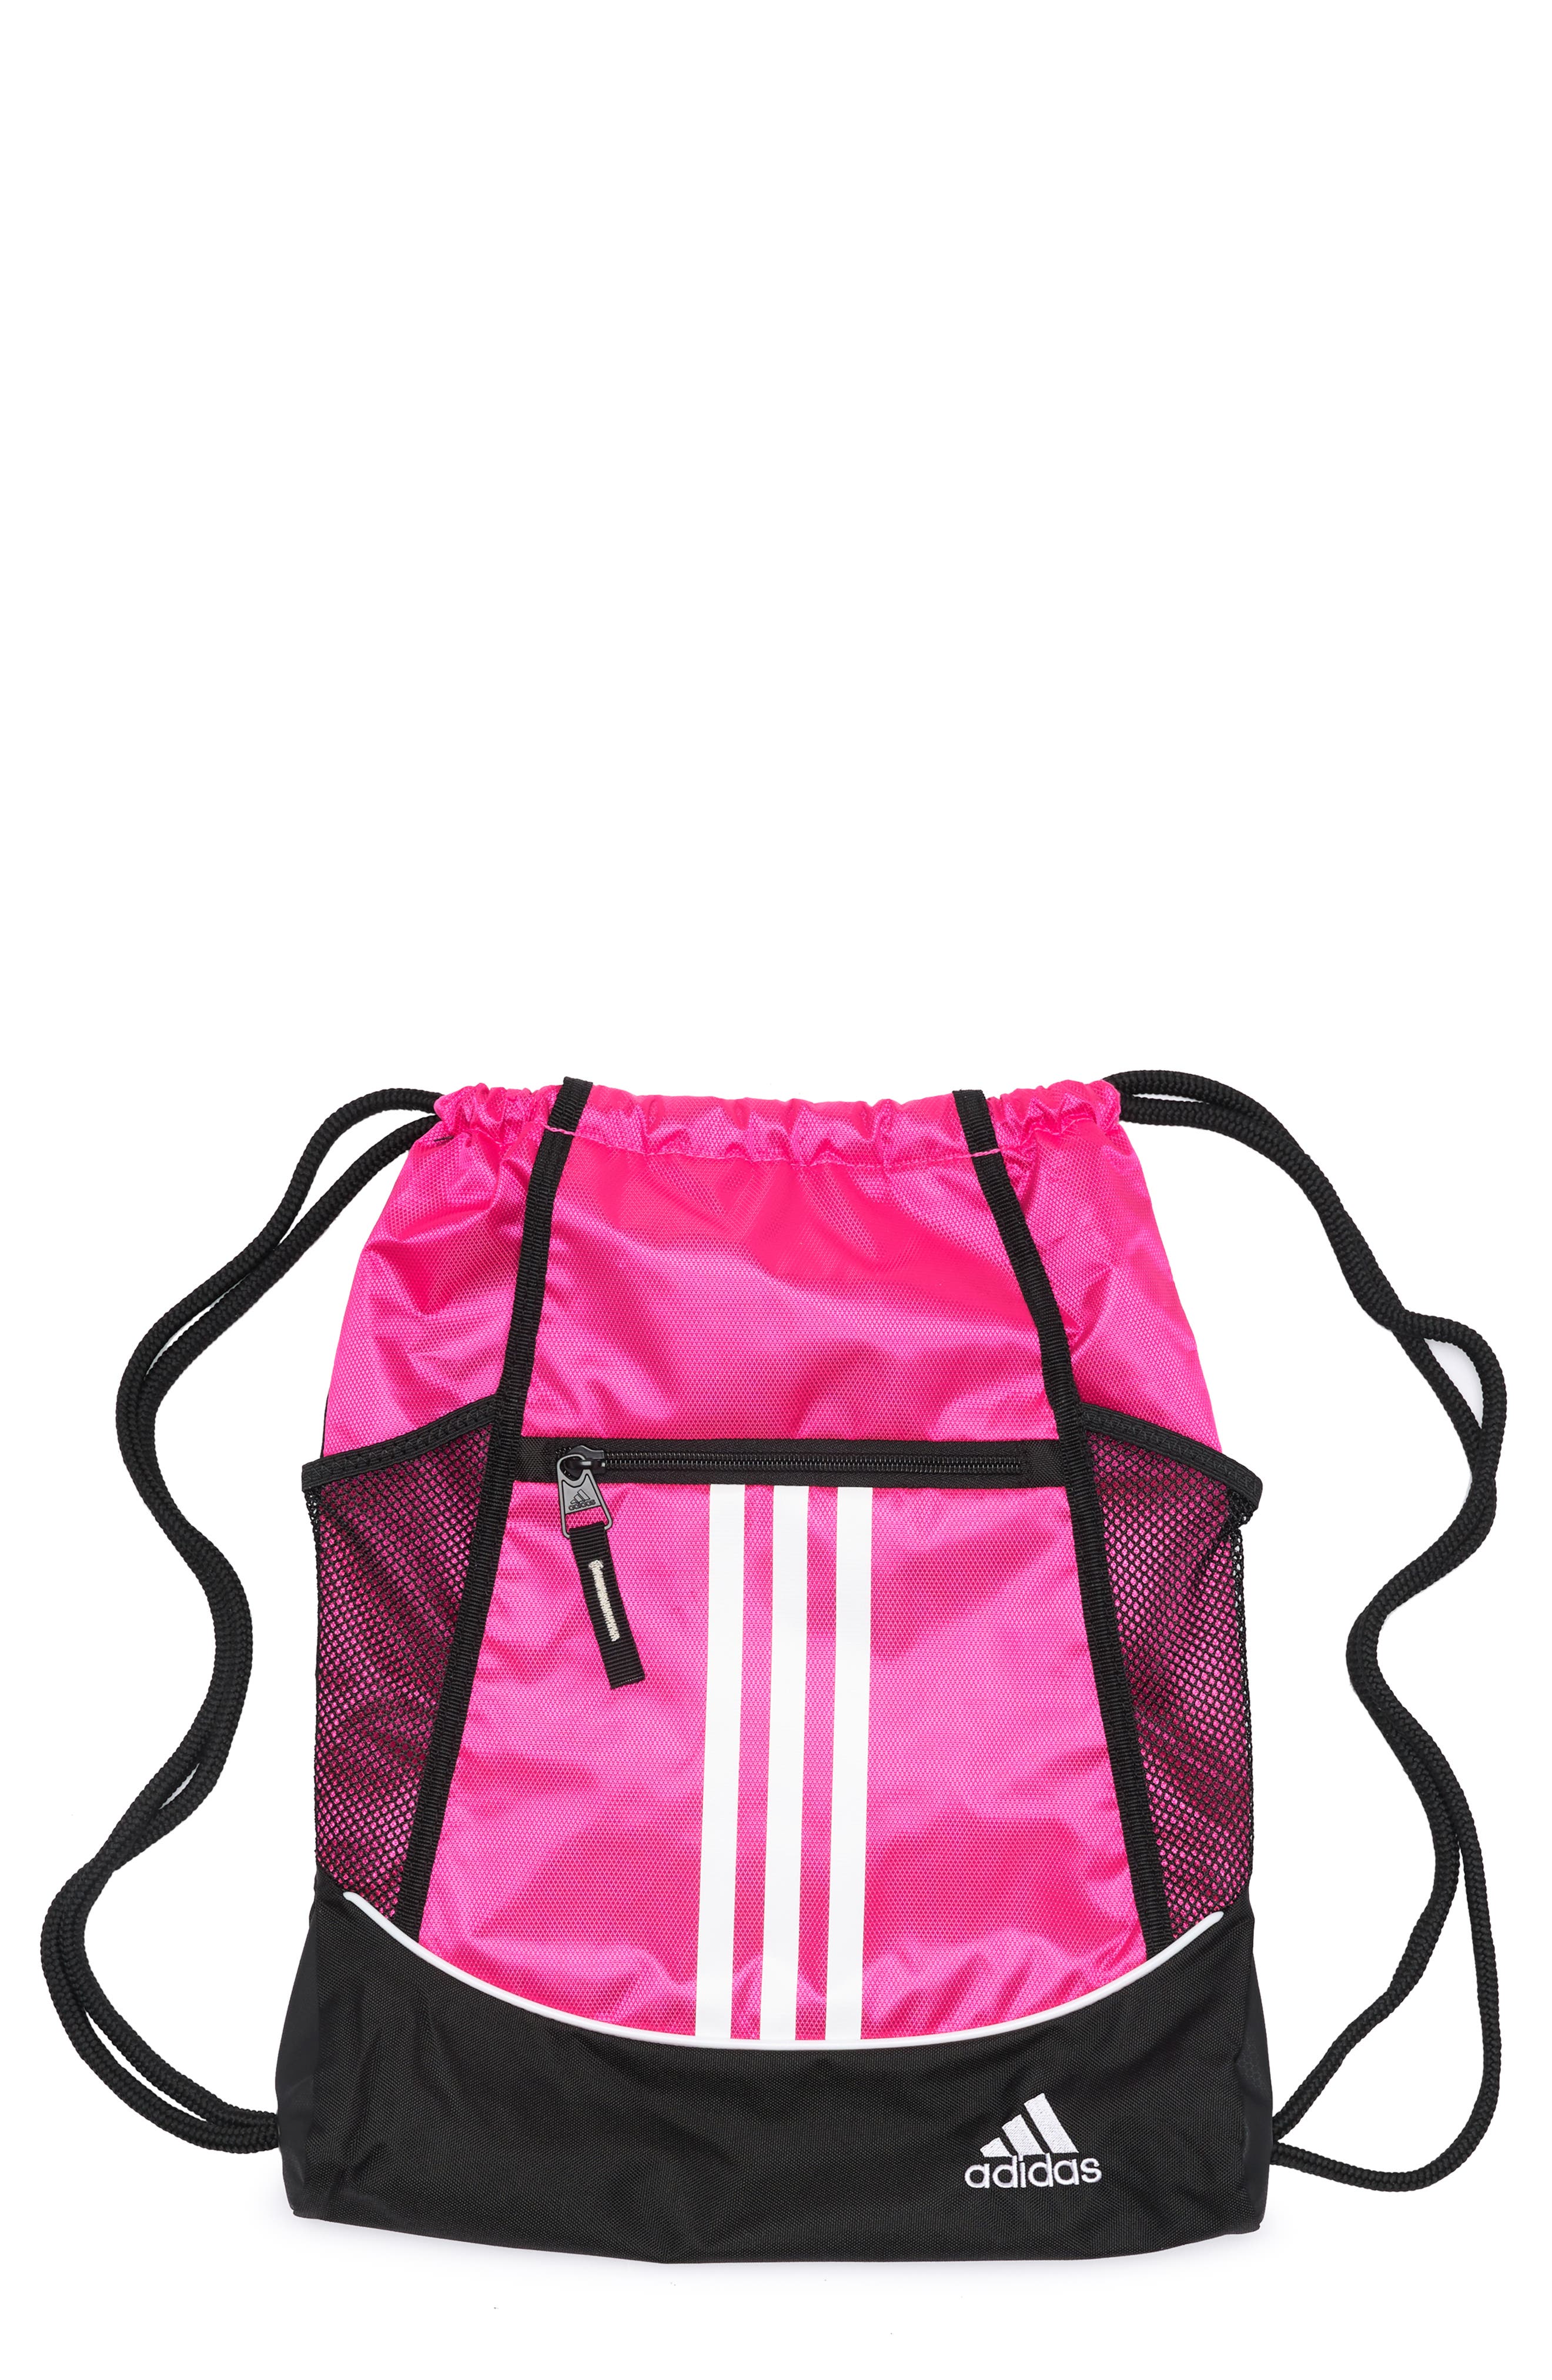 Agron Alliance Ii Sackpack In Med Pink